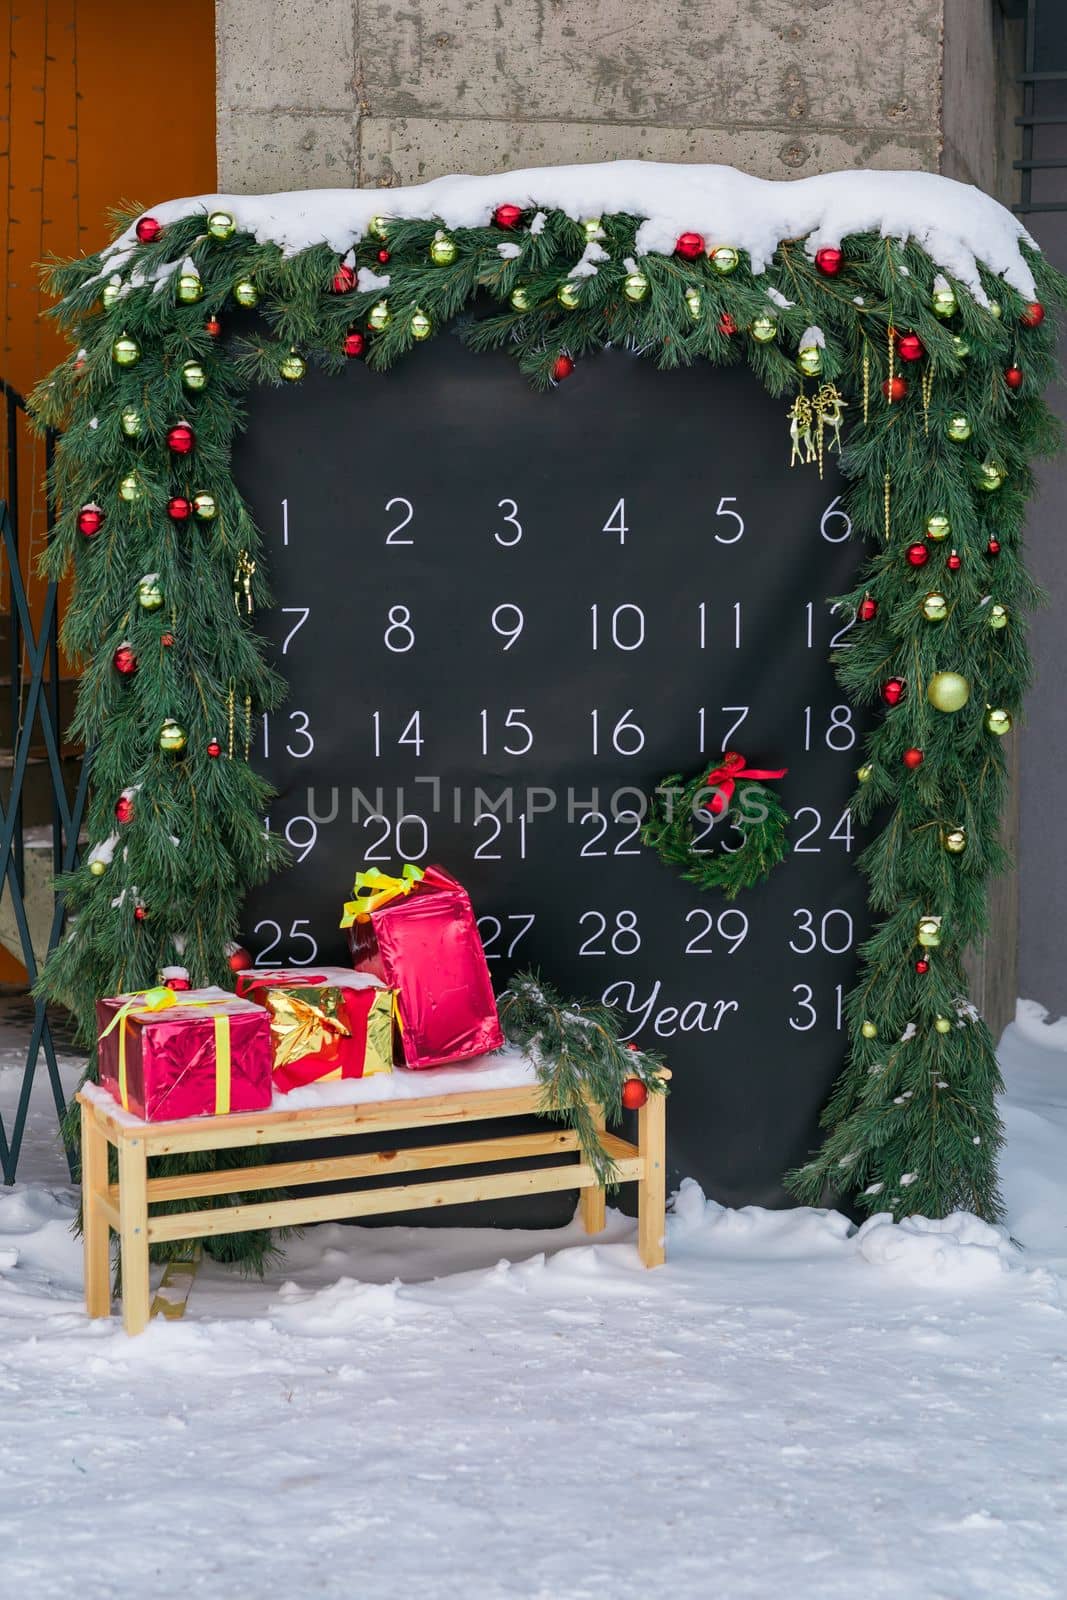 Simple desk advent calendar for December 2022 in city park with Christmas decorations by Satura86